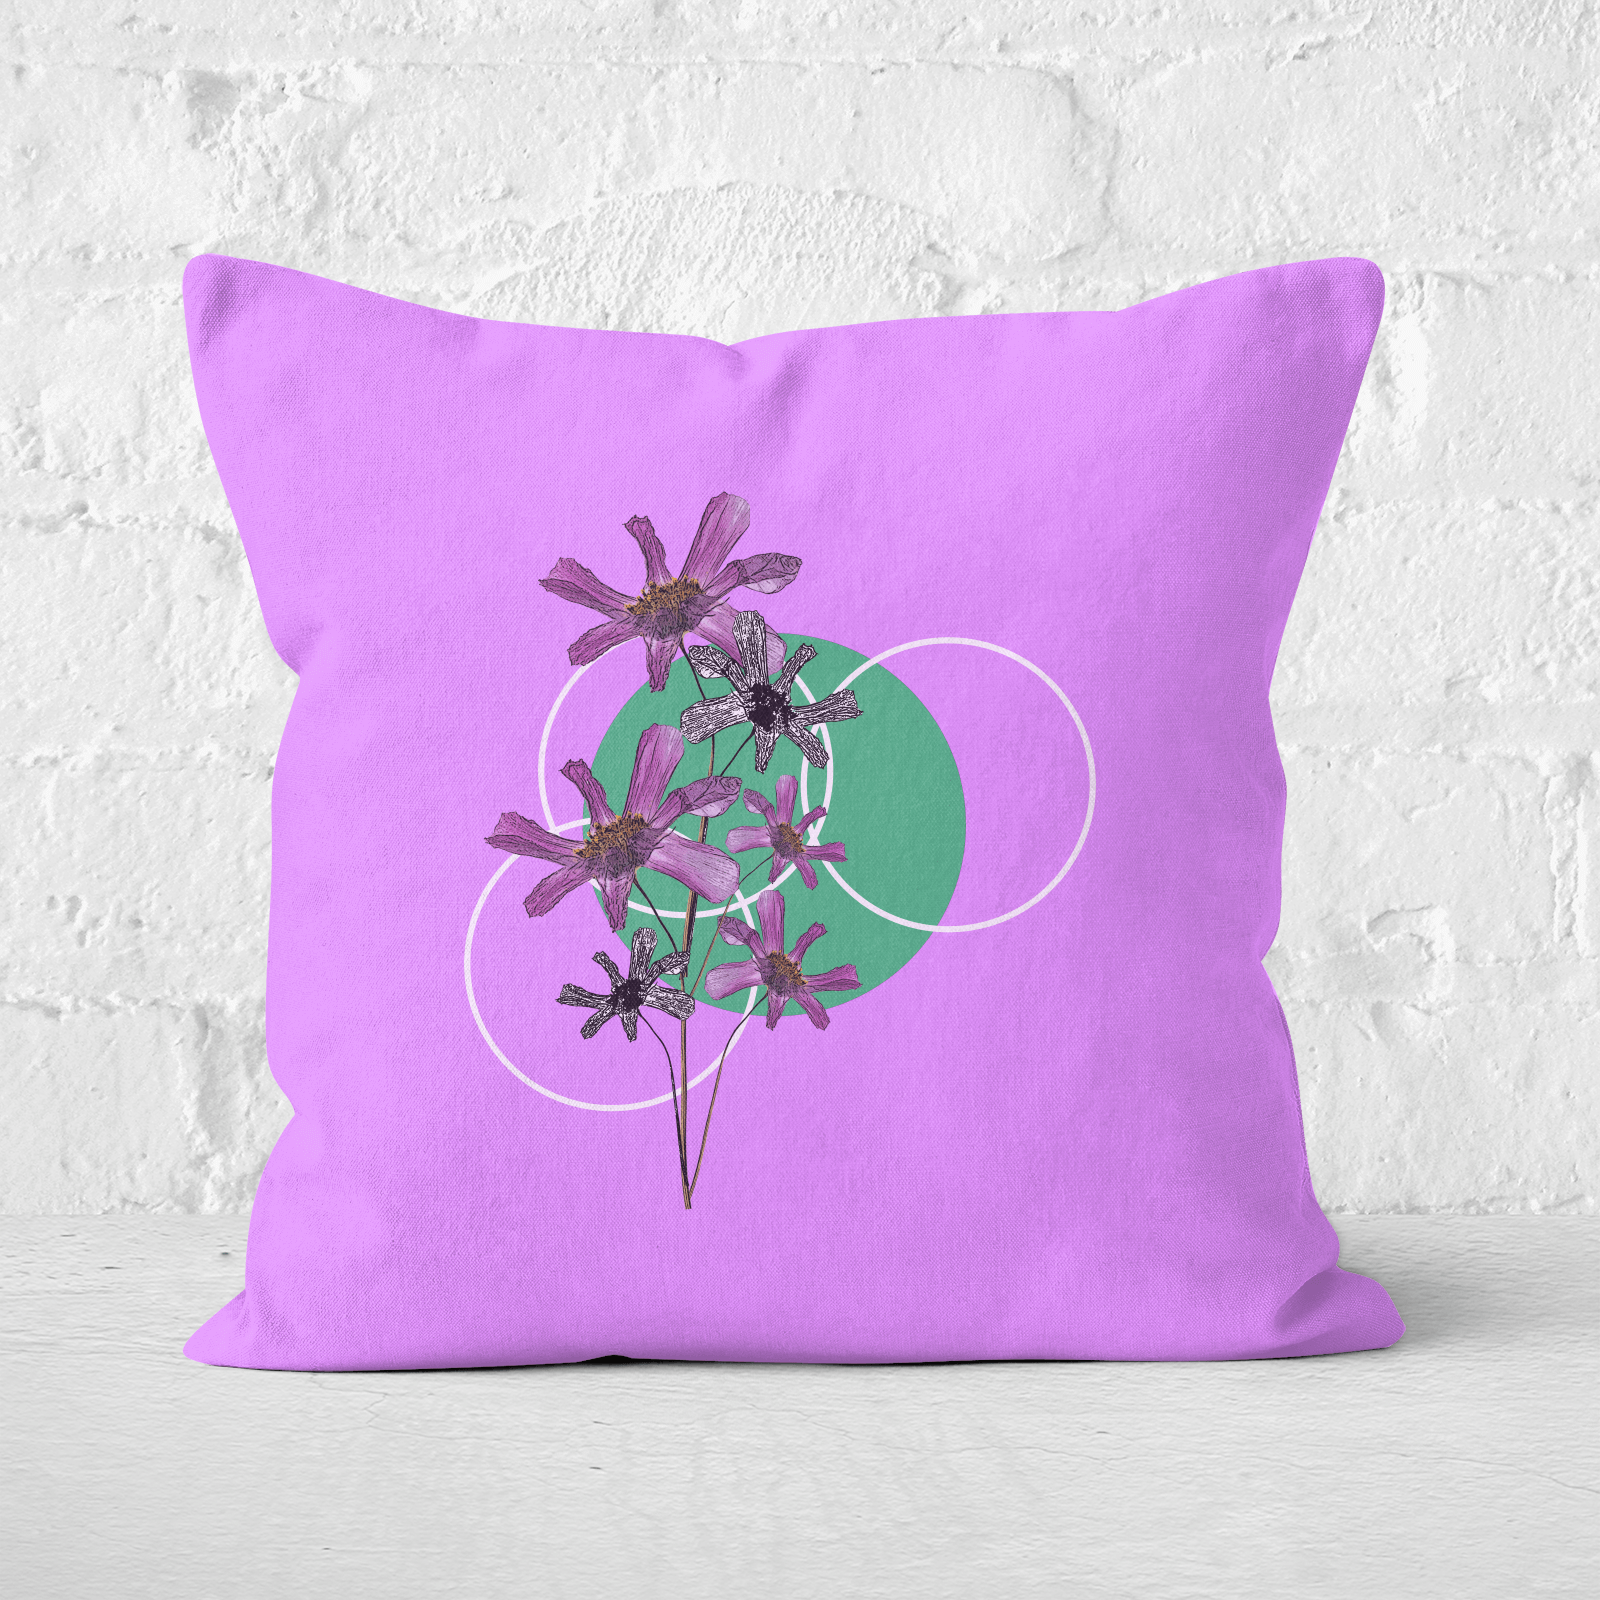 Pressed Flowers Feminine Sketch And Circle Print Square Cushion - 60x60cm - Soft Touch